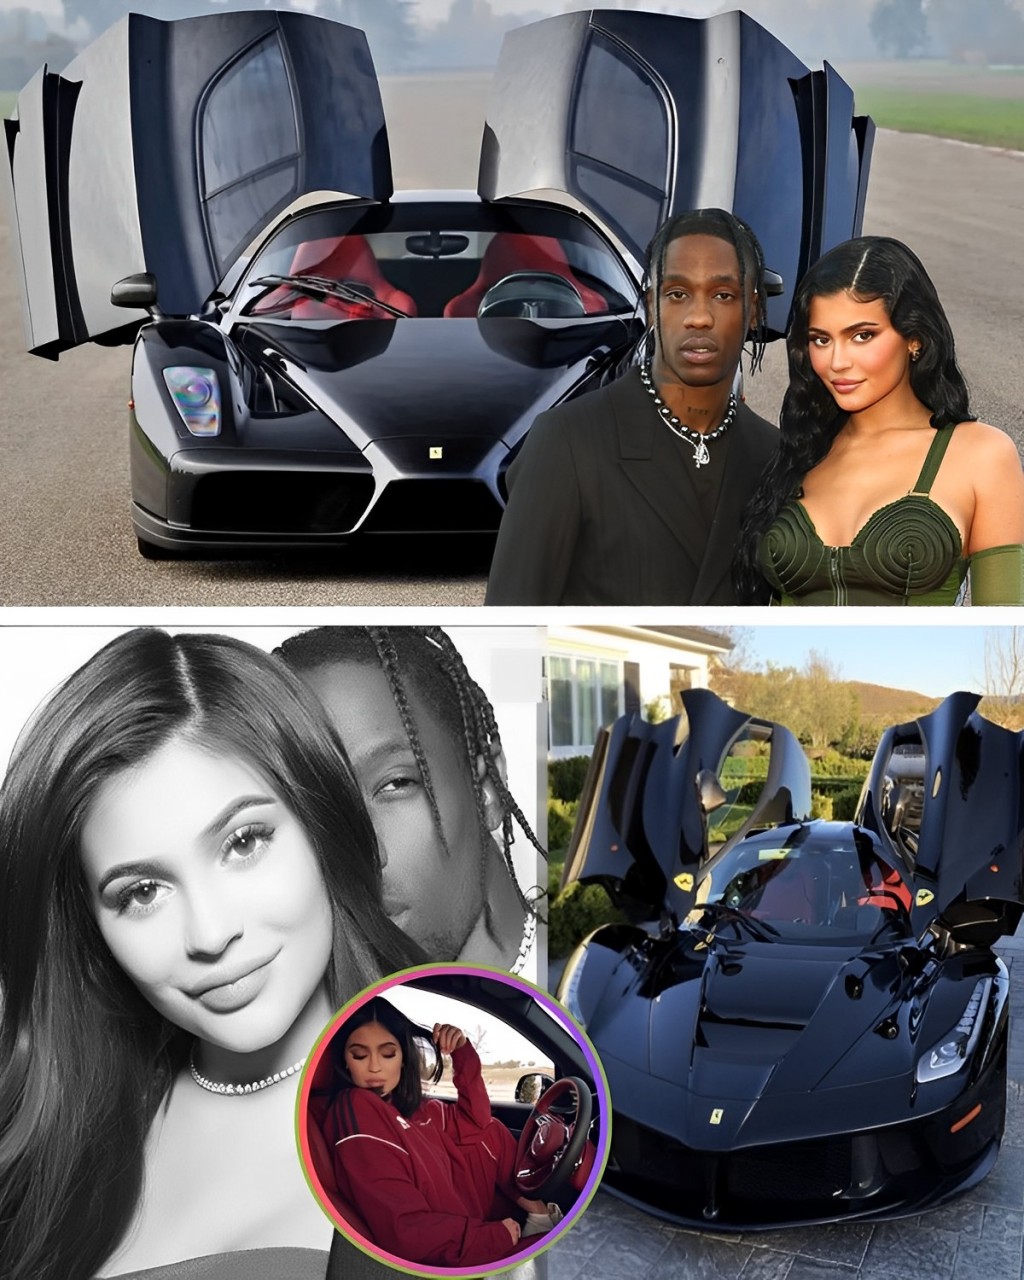 Cover Image for Travis Scott bought a car worth $1.4 million for Kylie Jenner to give to her